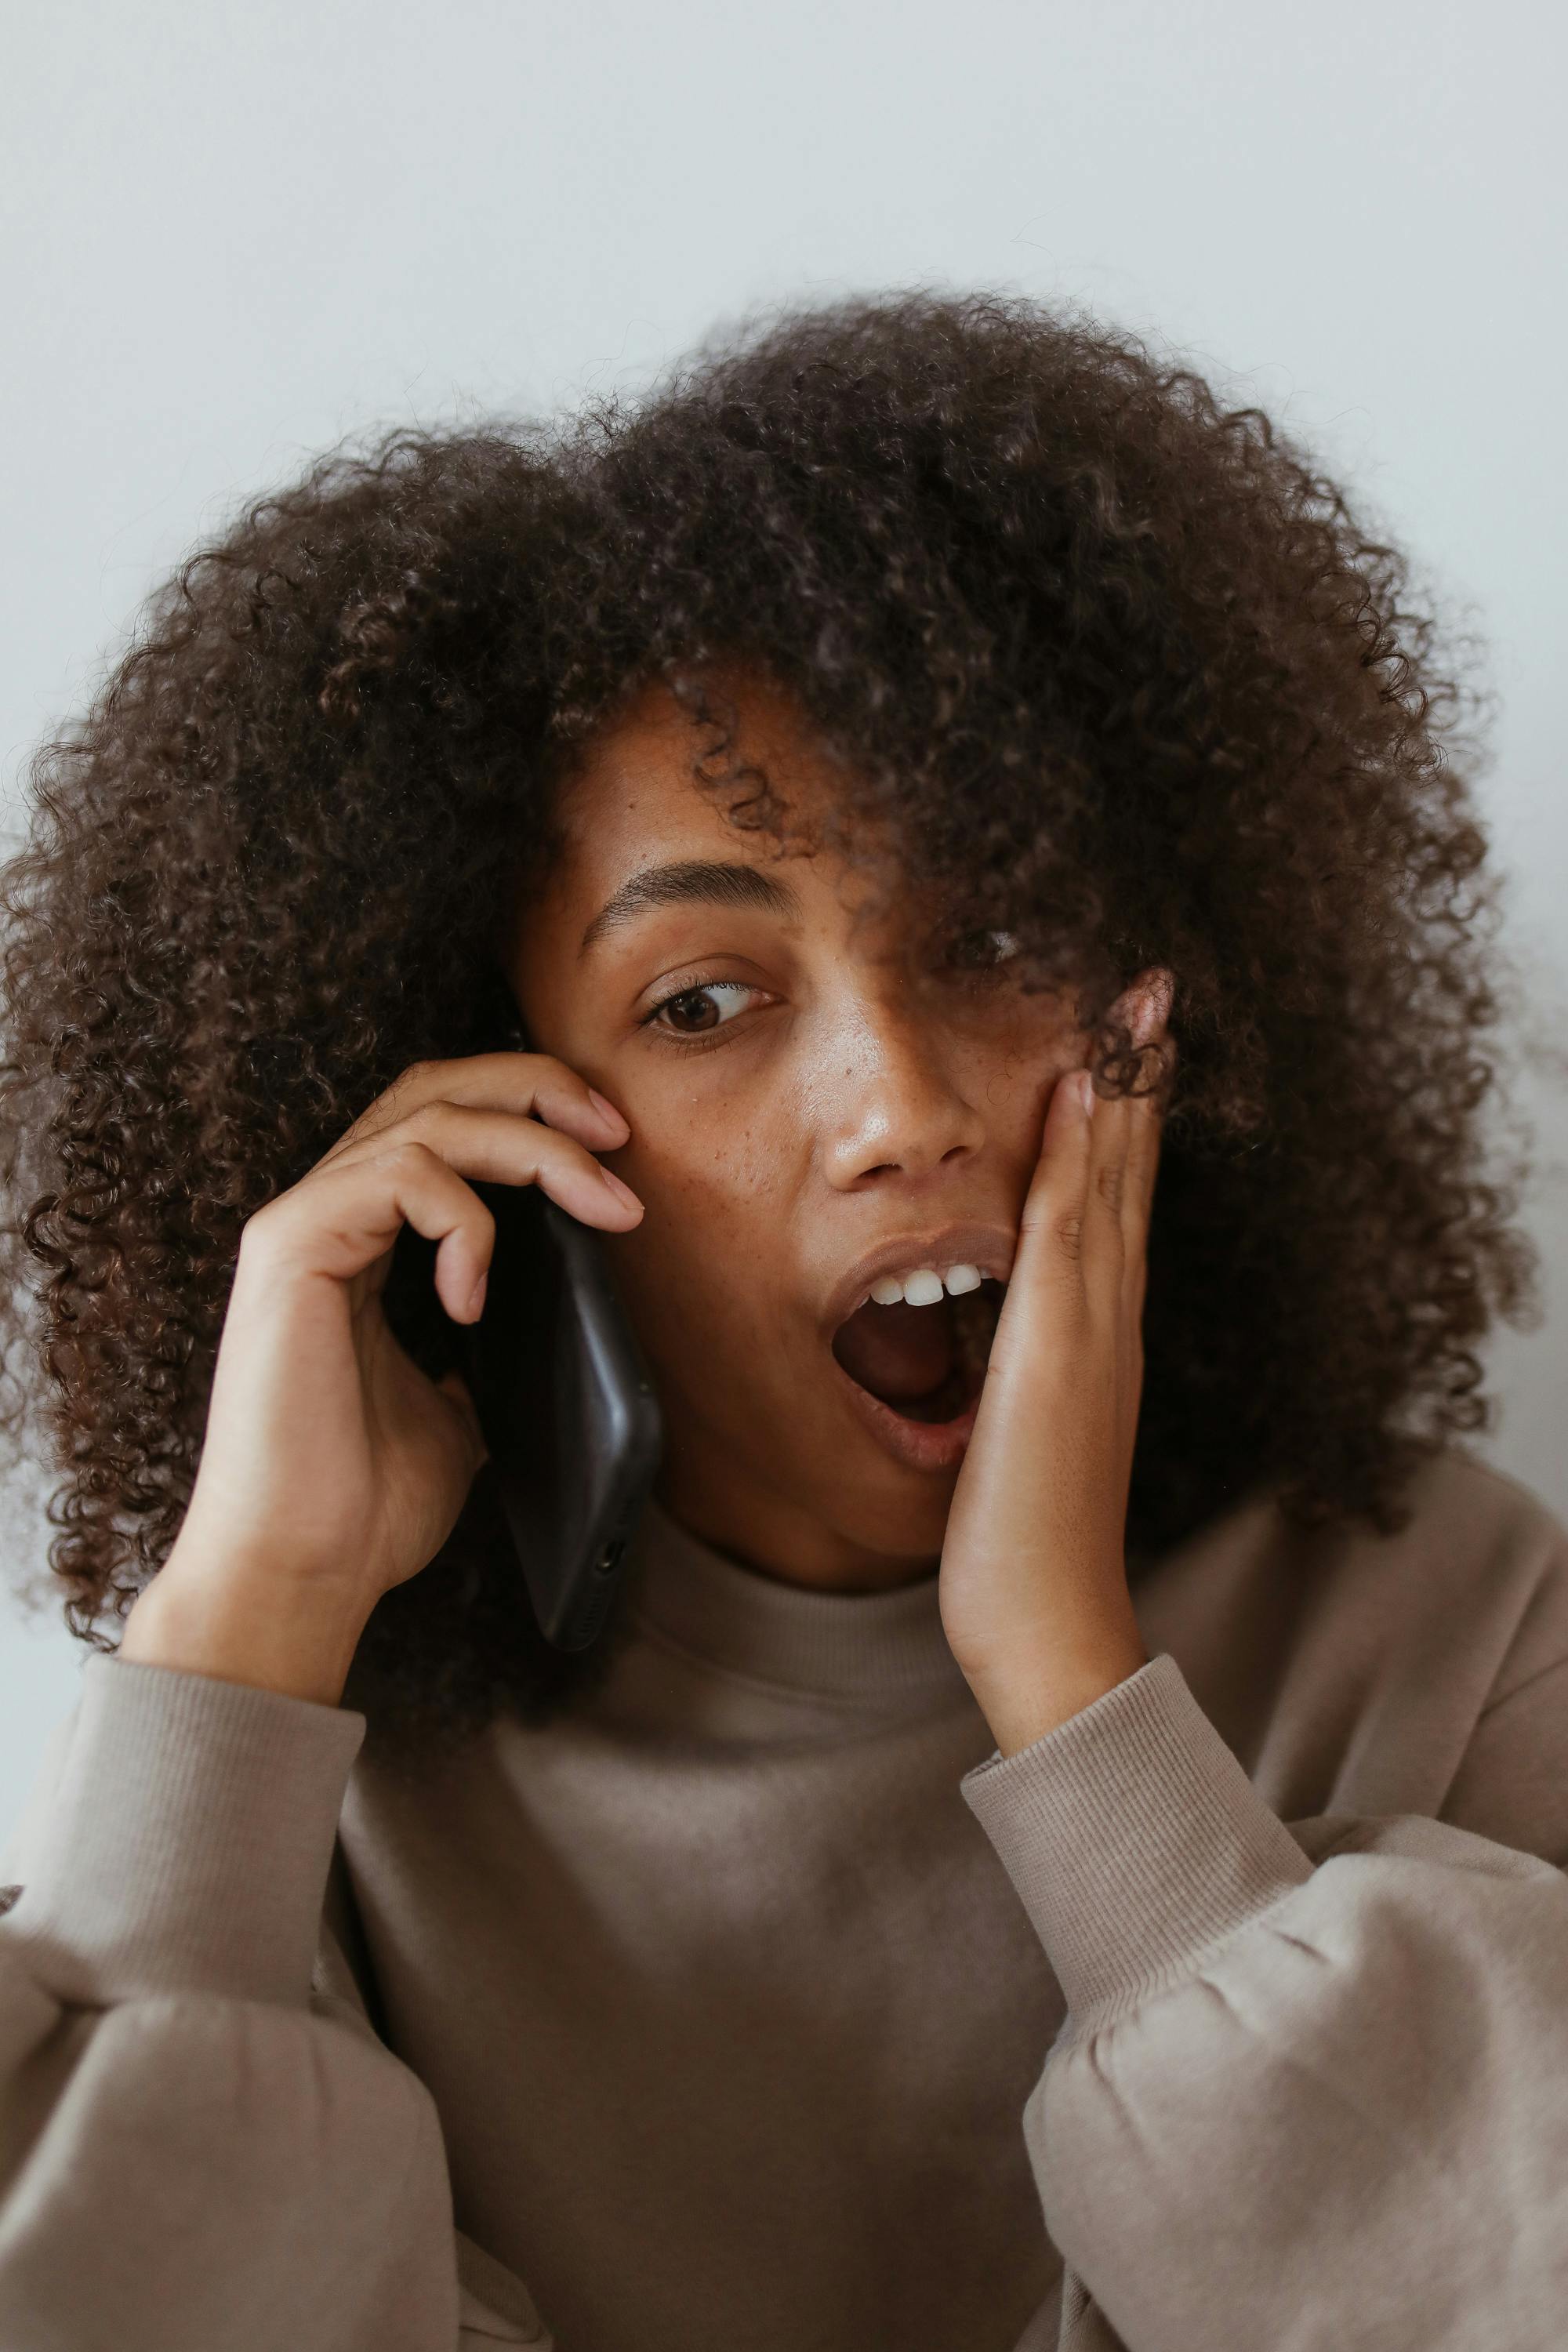 A woman reacting in shock while on the phone | Source: Pexels